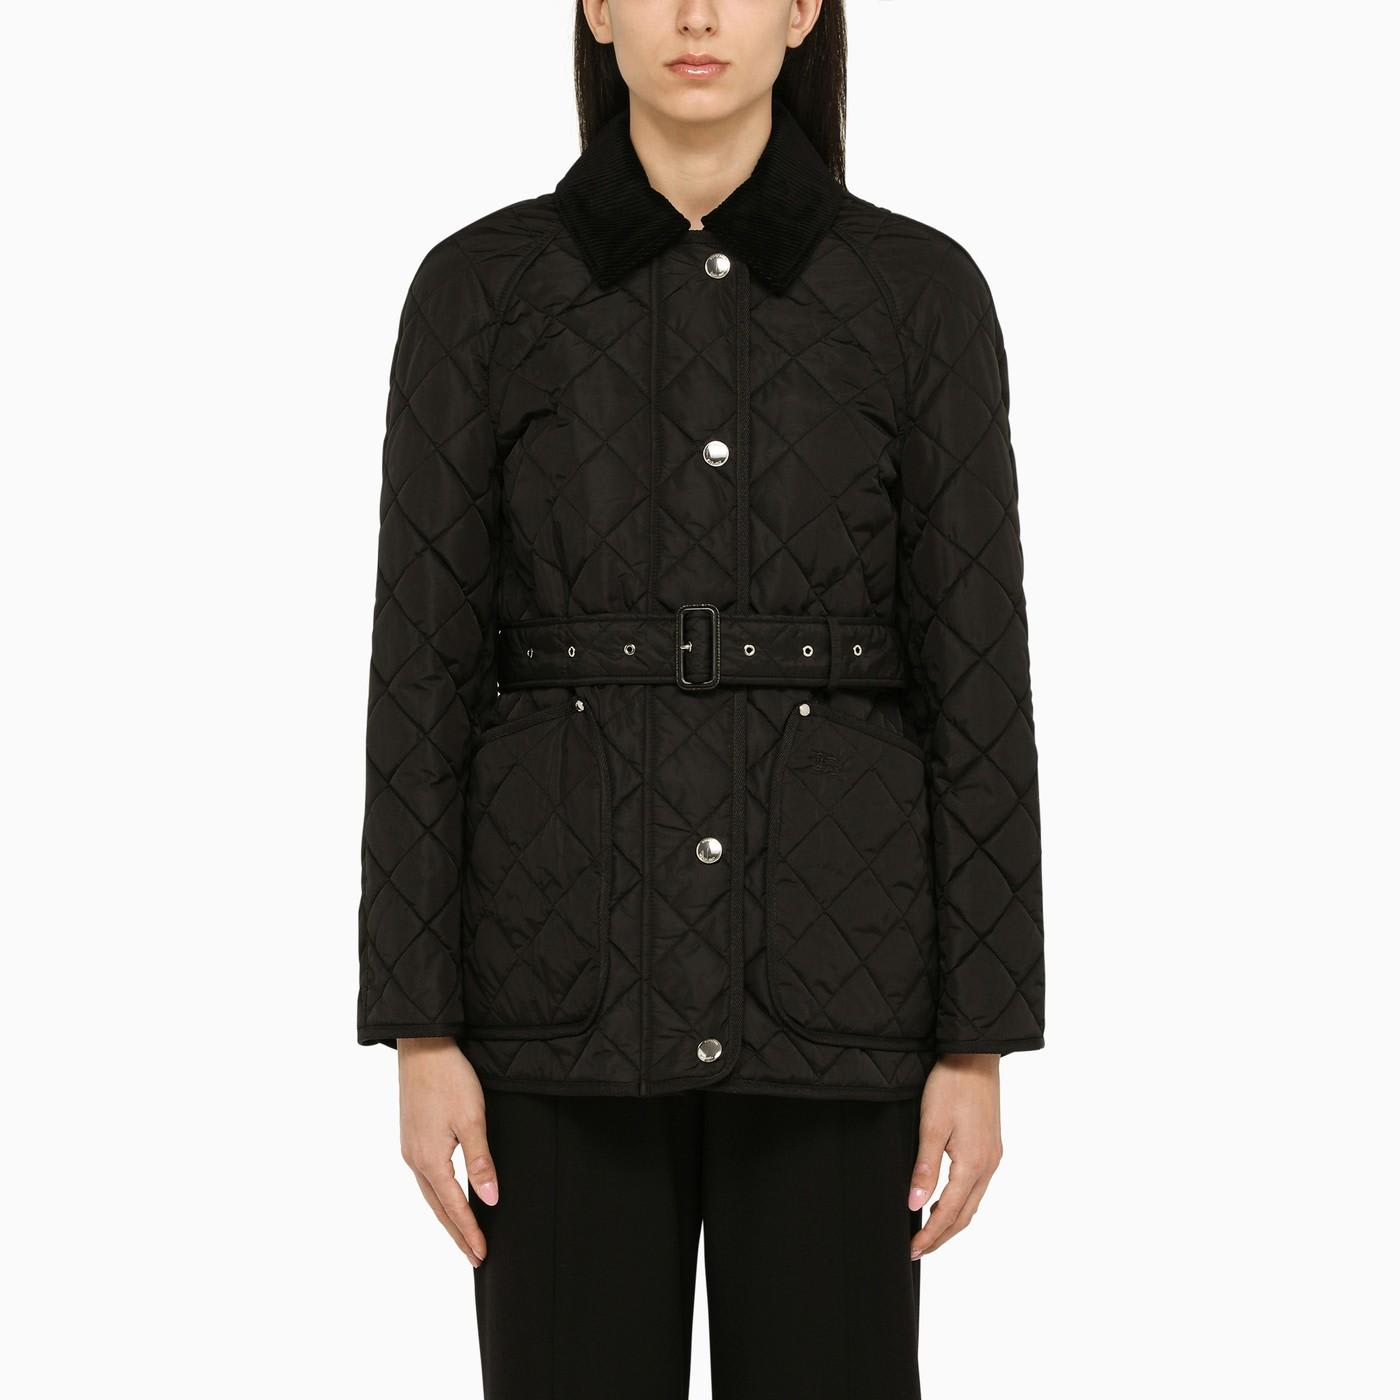 Burberry Black Quilted Nylon Jacket